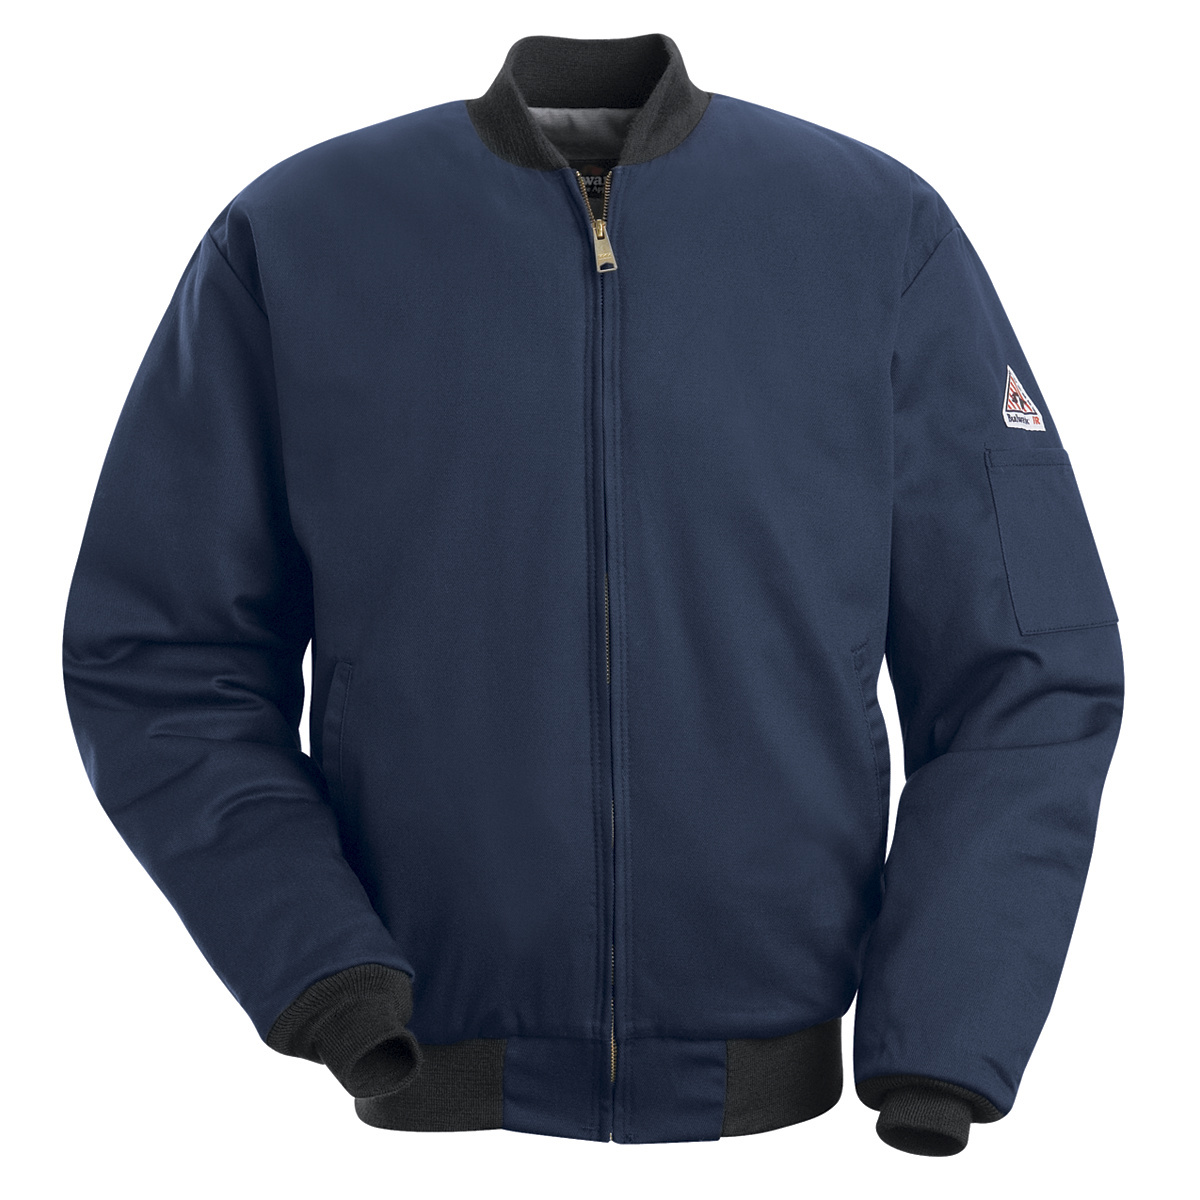 Bulwark® Large Tall Navy Blue EXCEL FR® Twill Cotton Water Repellent Flame Resistant Jacket With Cotton Lining And Zipper Front